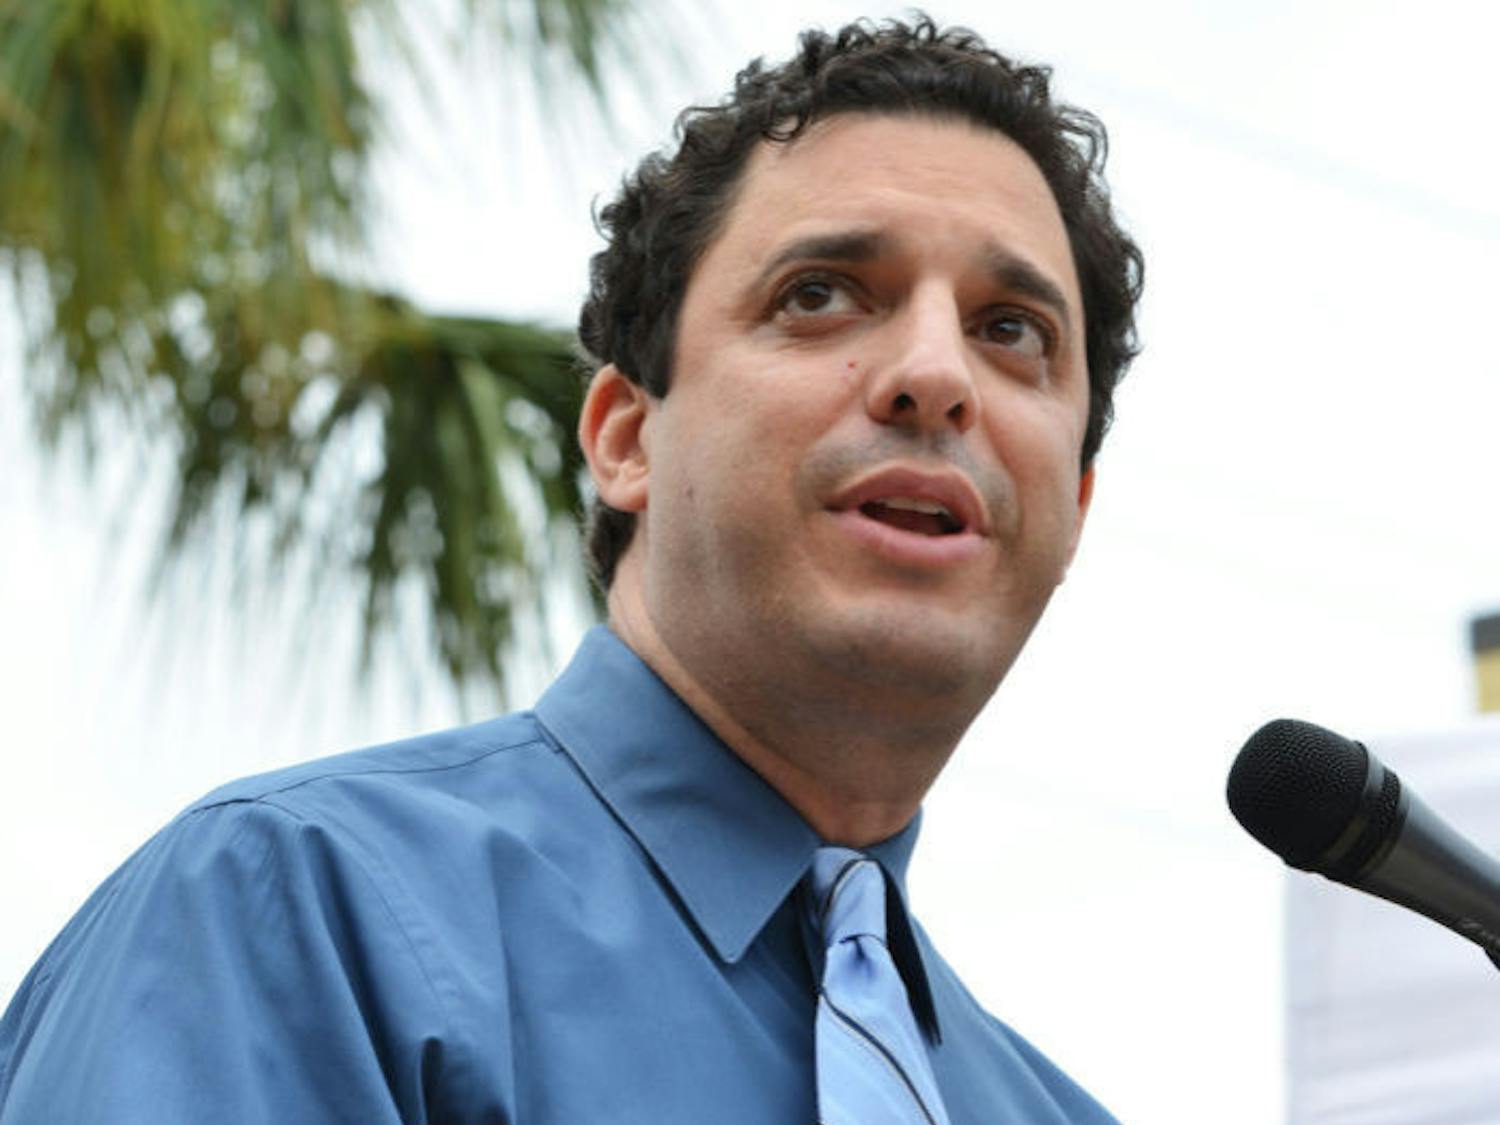 David Silverman, president of American Atheists, speaks during the unveiling of an Atheist monument outside the Bradford County Courthouse on Saturday, June 29, 2013 in Starke, Fla.